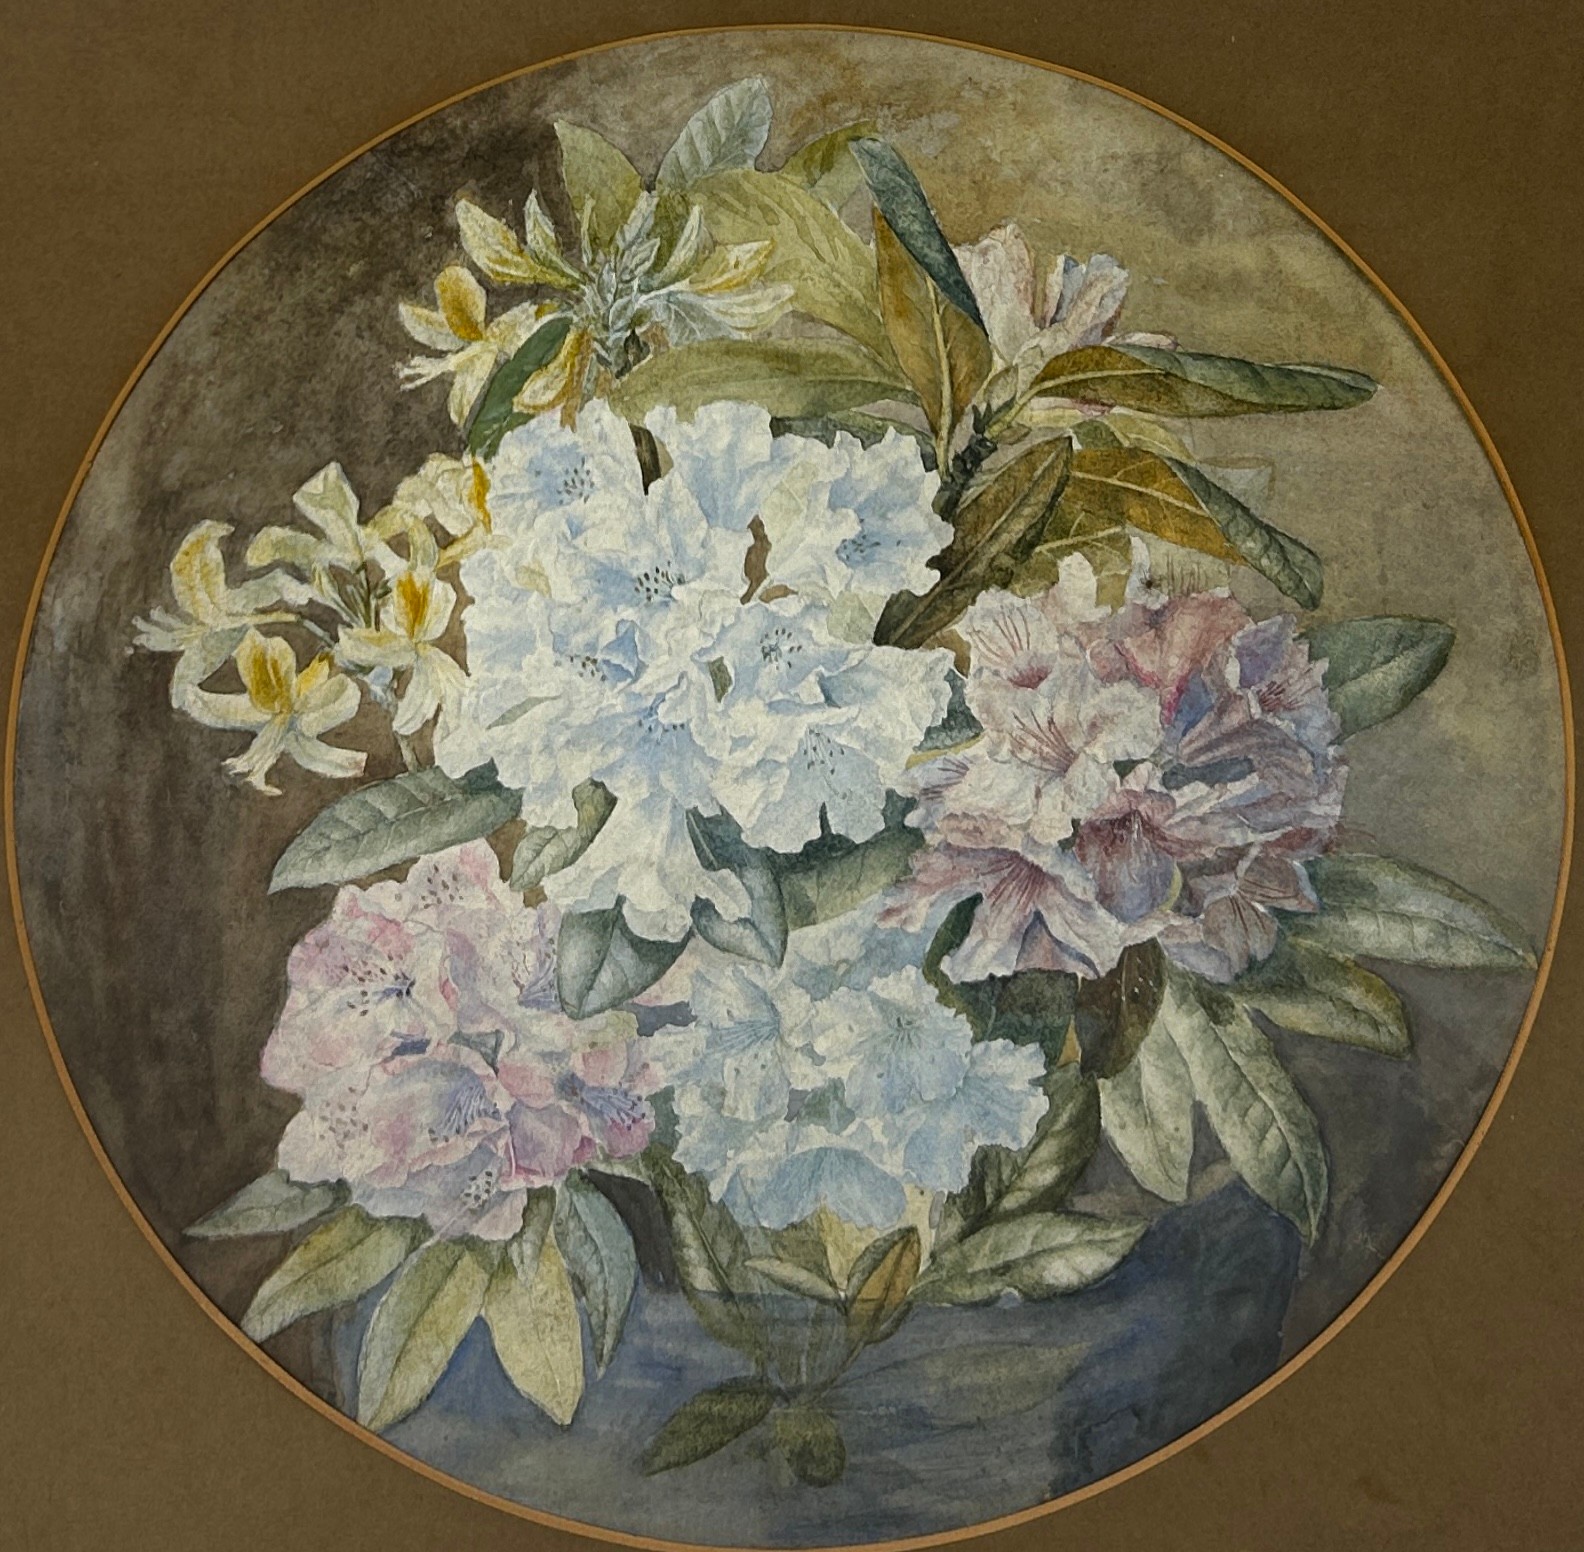 A WATERCOLOUR PAINTING ON PAPER DEPICTING FLOWERS, 42cm x 42cm In circular mount, framed and glazed. - Image 2 of 4